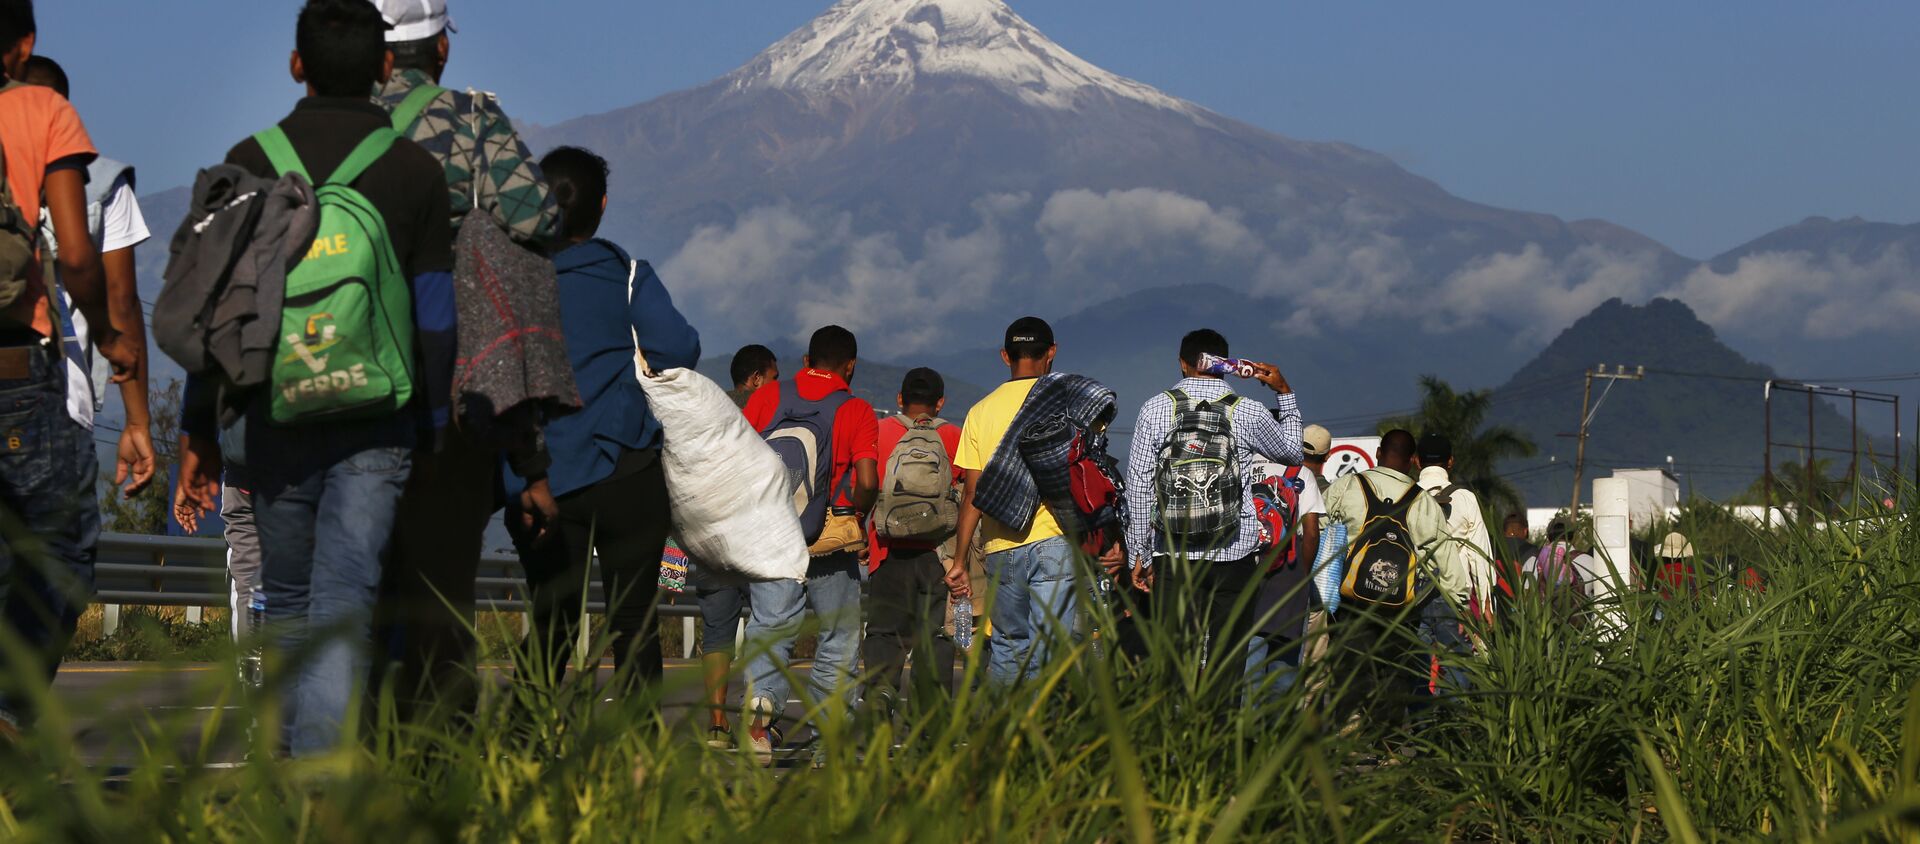 Central American migrants begin their morning trek as part of a thousands-strong caravan hoping to reach the U.S. border, as they face the Pico de Orizaba volcano upon departure from Cordoba, Veracruz state, Mexico, Monday, Nov. 5, 2018. A big group of Central Americans pushed on toward Mexico City from a coastal state Monday, planning to exit a part of the country that has long been treacherous for migrants seeking to get to the United States. - Sputnik International, 1920, 24.02.2021